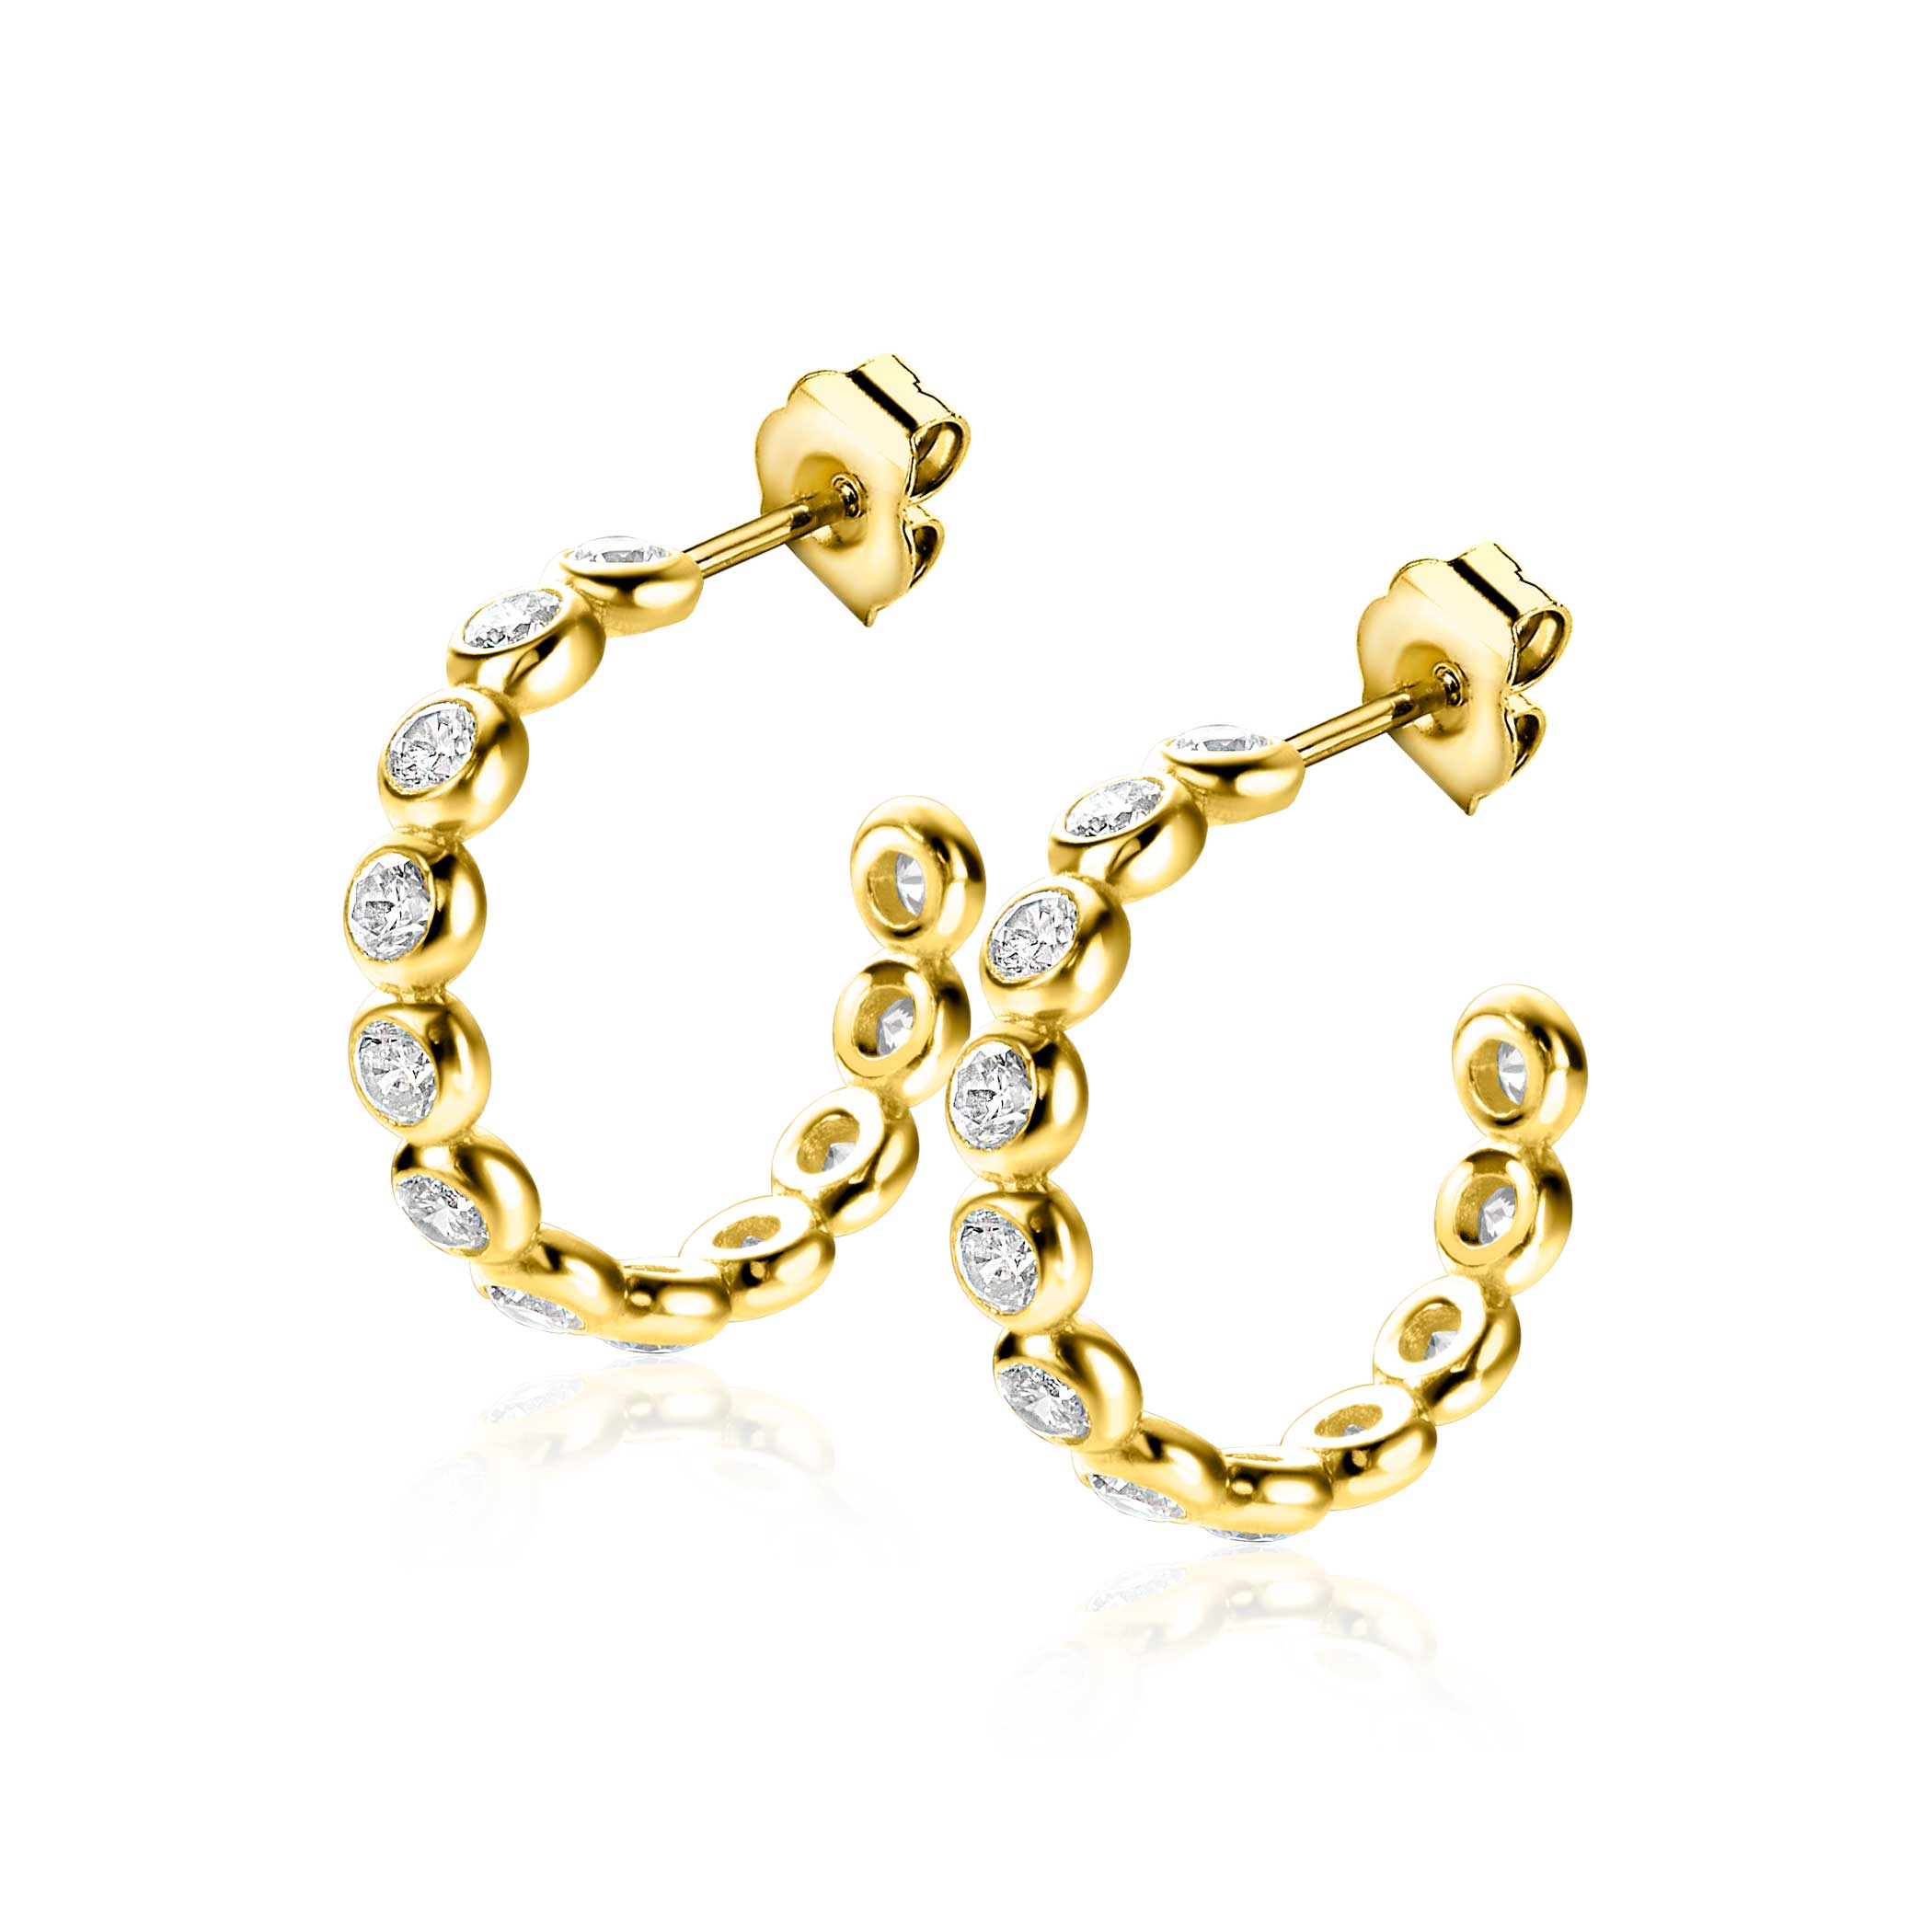 21mm ZINZI gold plated silver half hoop earrings, 4mm tube thickness, set with 12 white zirconias and with butterfly clasp ZIO2573Y
